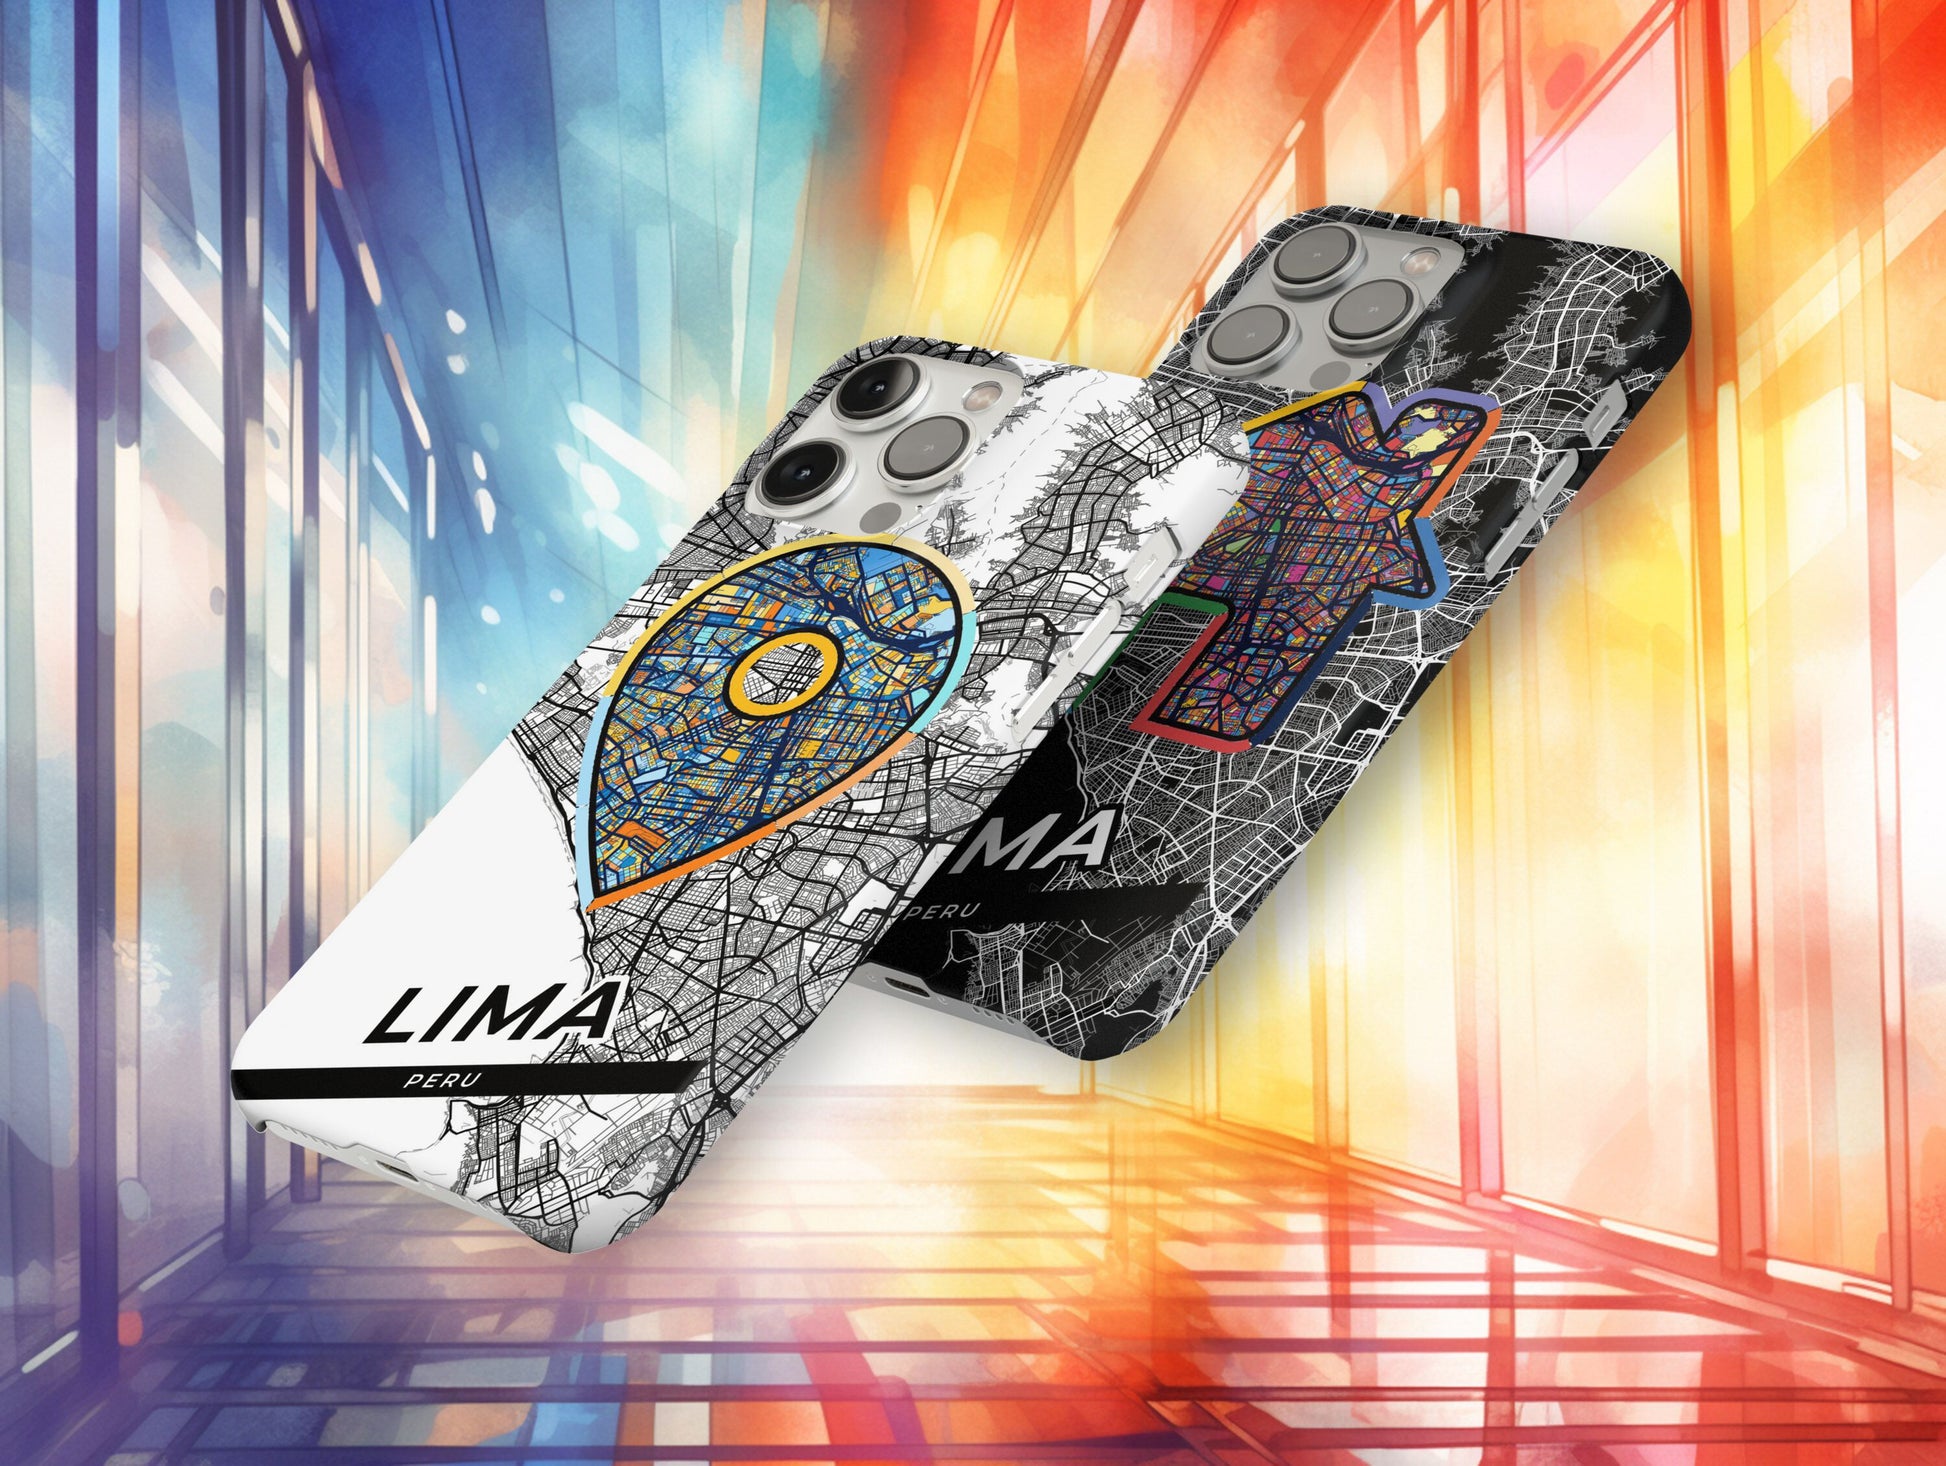 Lima Peru slim phone case with colorful icon. Birthday, wedding or housewarming gift. Couple match cases.